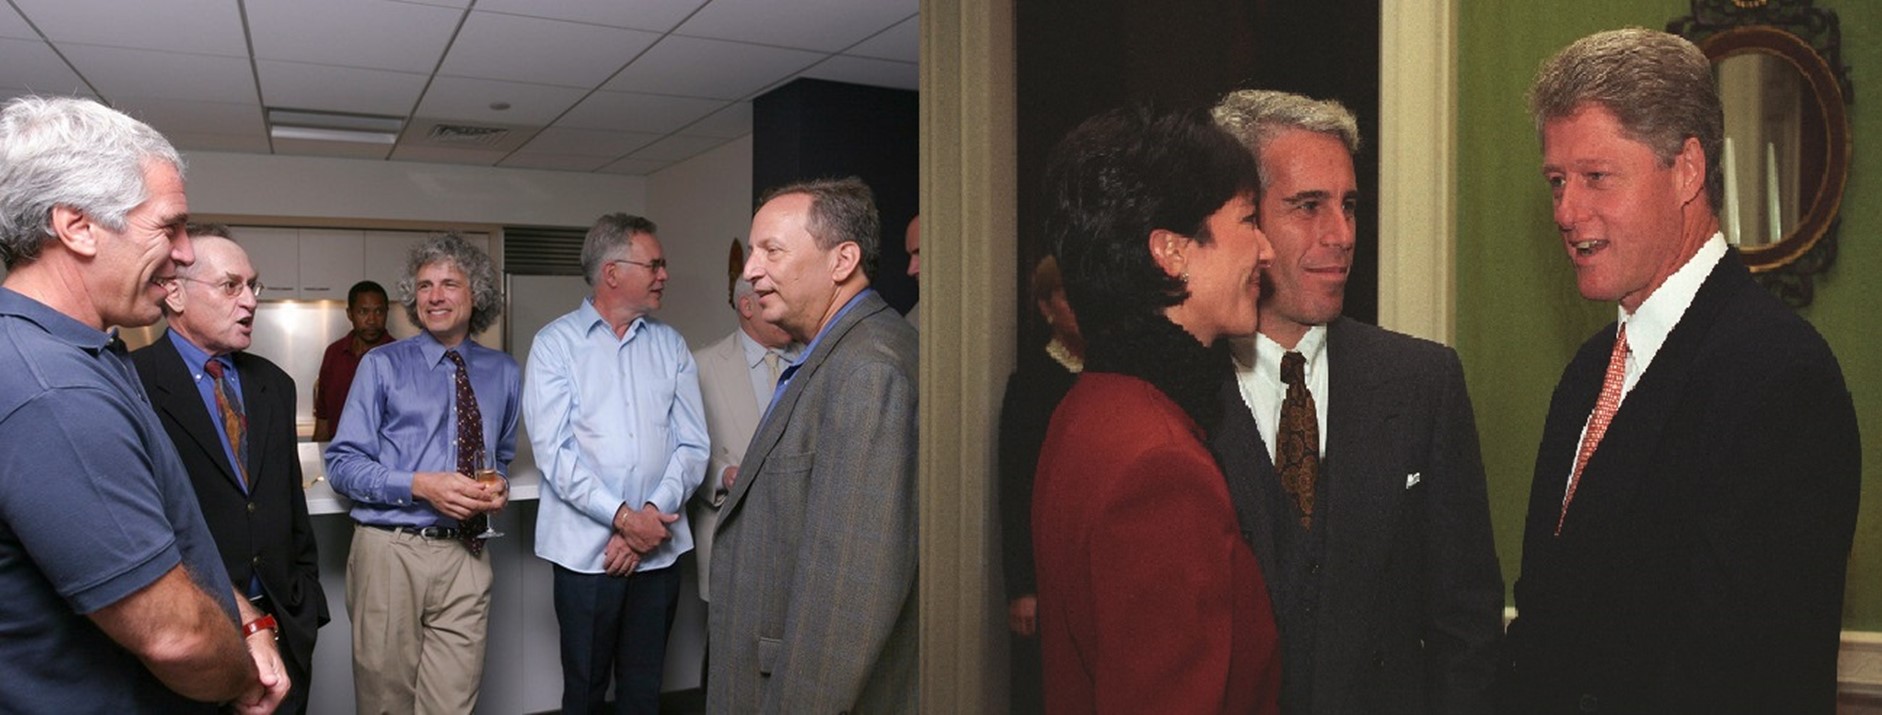 Epstein Schmoozing with elites. Left, from left: Epstein, Alan Dershowitz, Steven Pinker, unidentified man, and Larry Summers, presumably at Harvard. Right: with Ghislaine and Bill Clinton